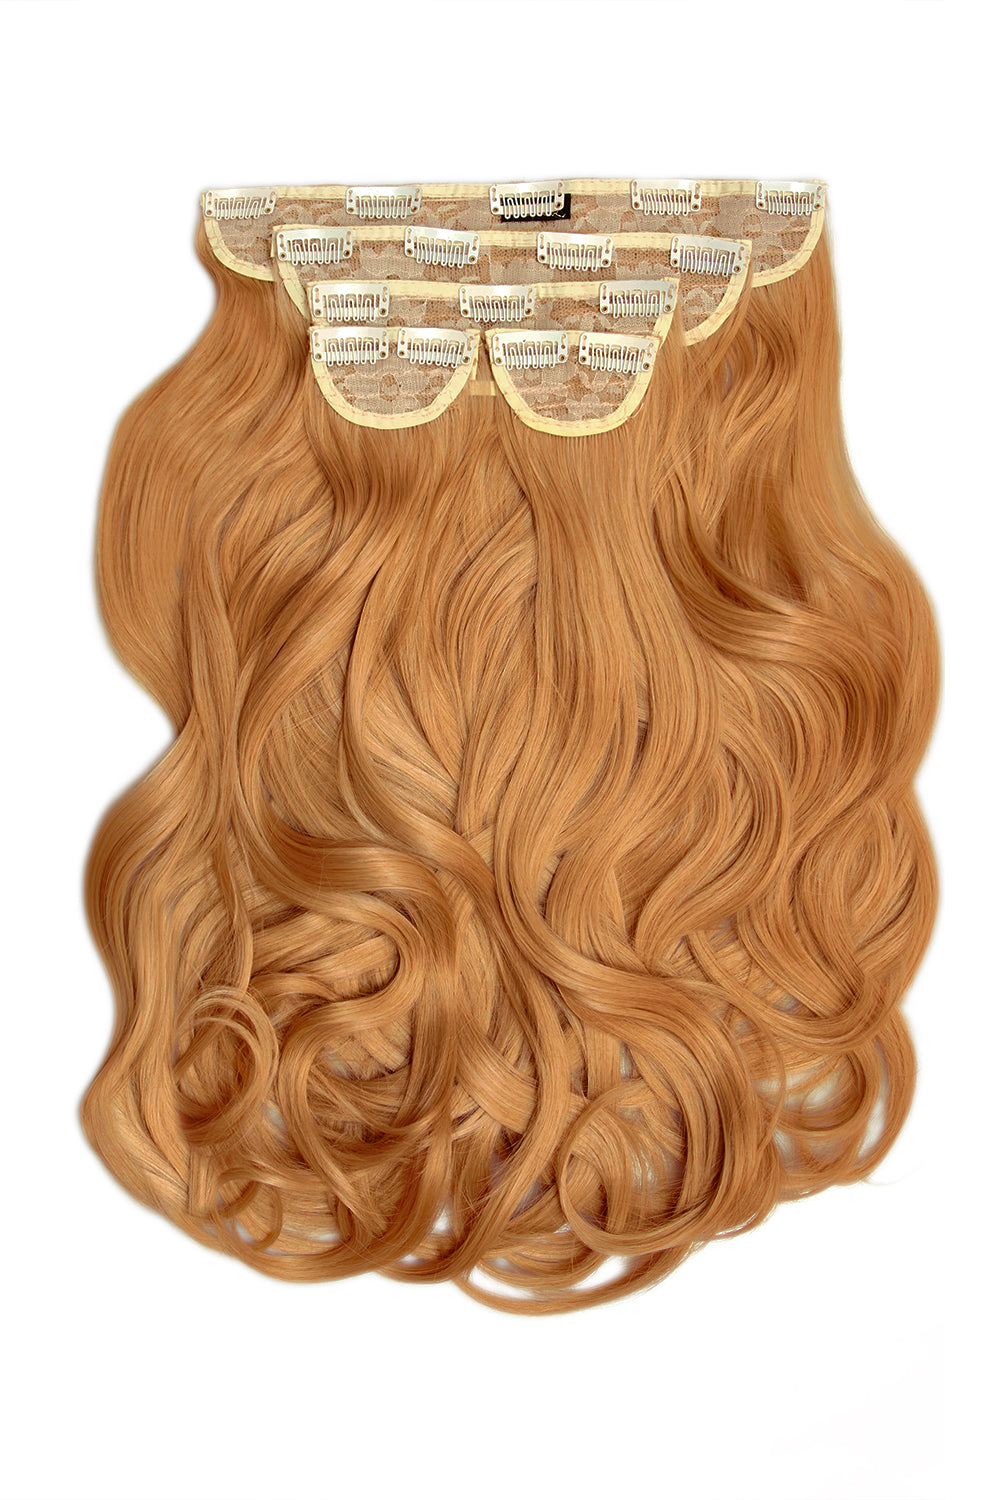 Super Thick 22" 5 Piece Blow Dry Wavy Clip In Hair Extensions - Strawberry Blonde